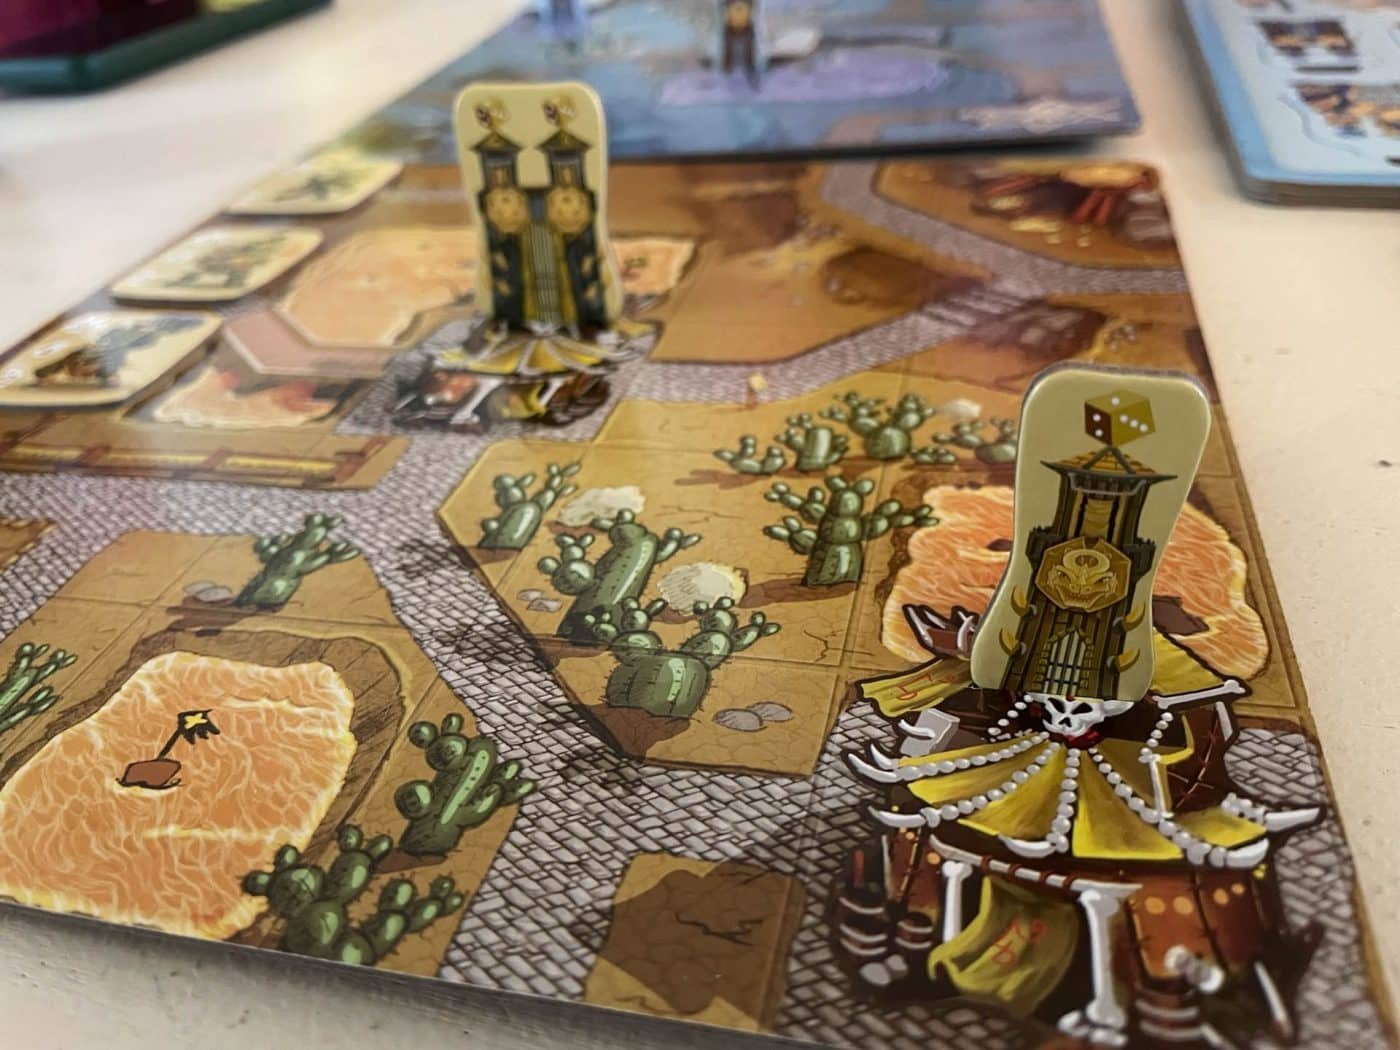 Each player in zaberias starts on their own map, and tries to encroach on enemy territory to win.